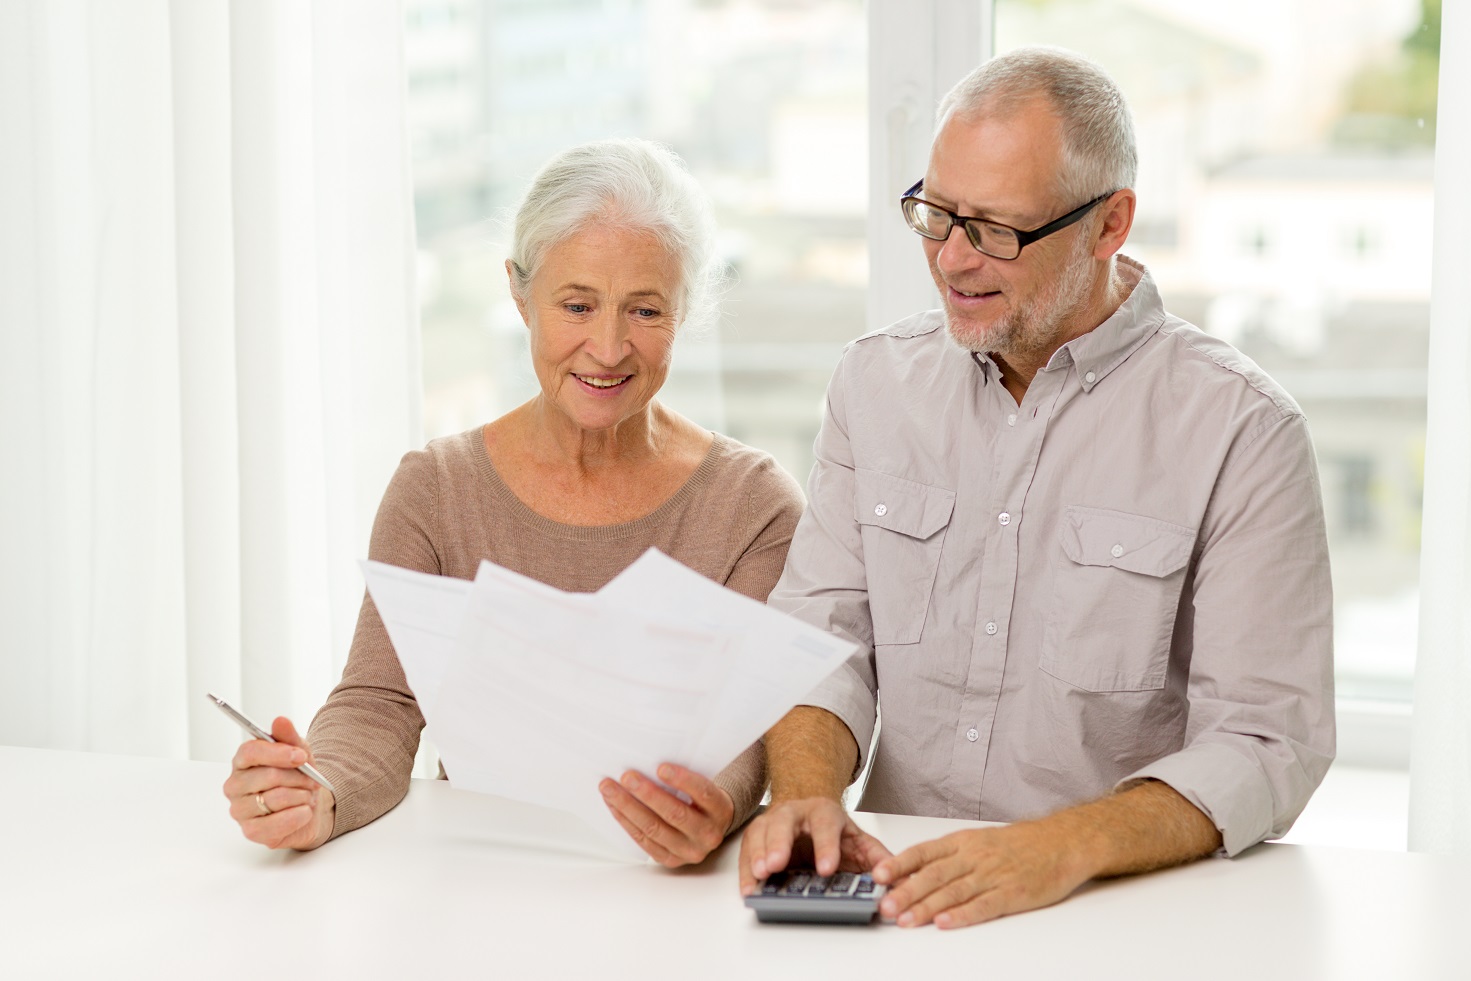 THE RETIREE’S GUIDE TO PLANNING TAX STRATEGIES